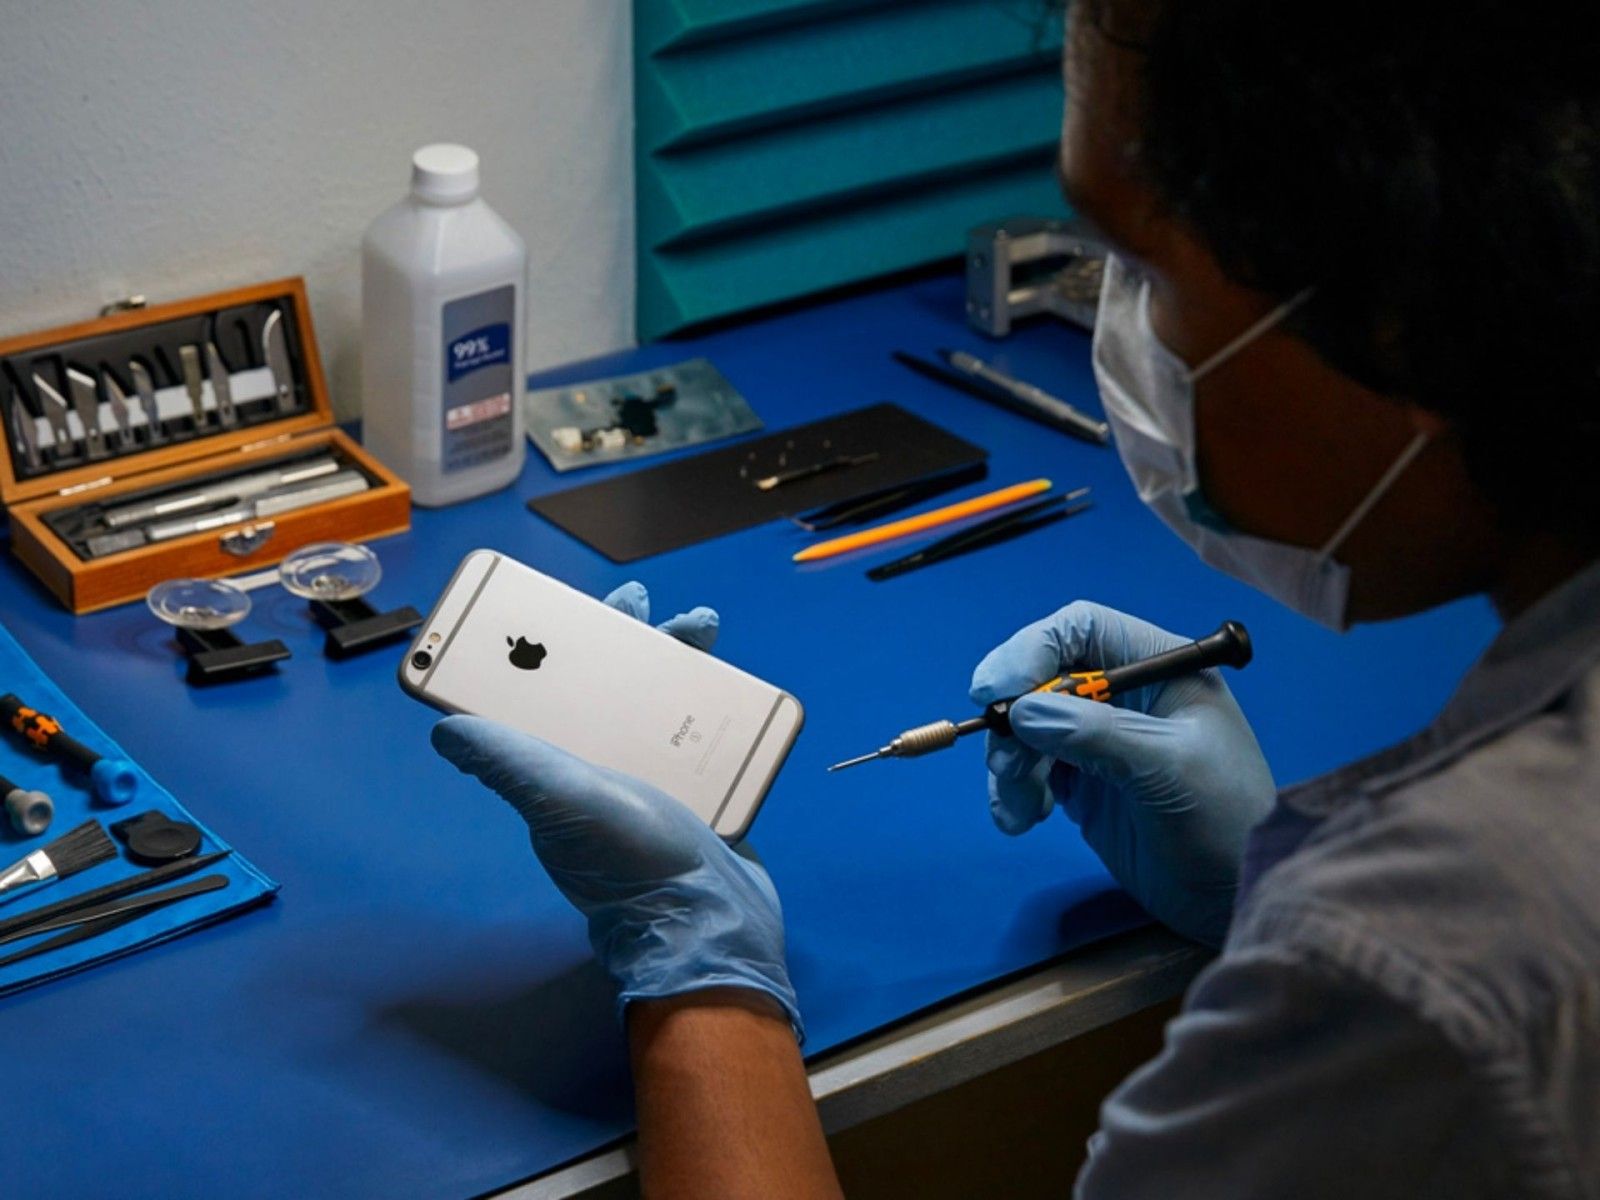 Apple iPhone 6S is being inspected and repaired